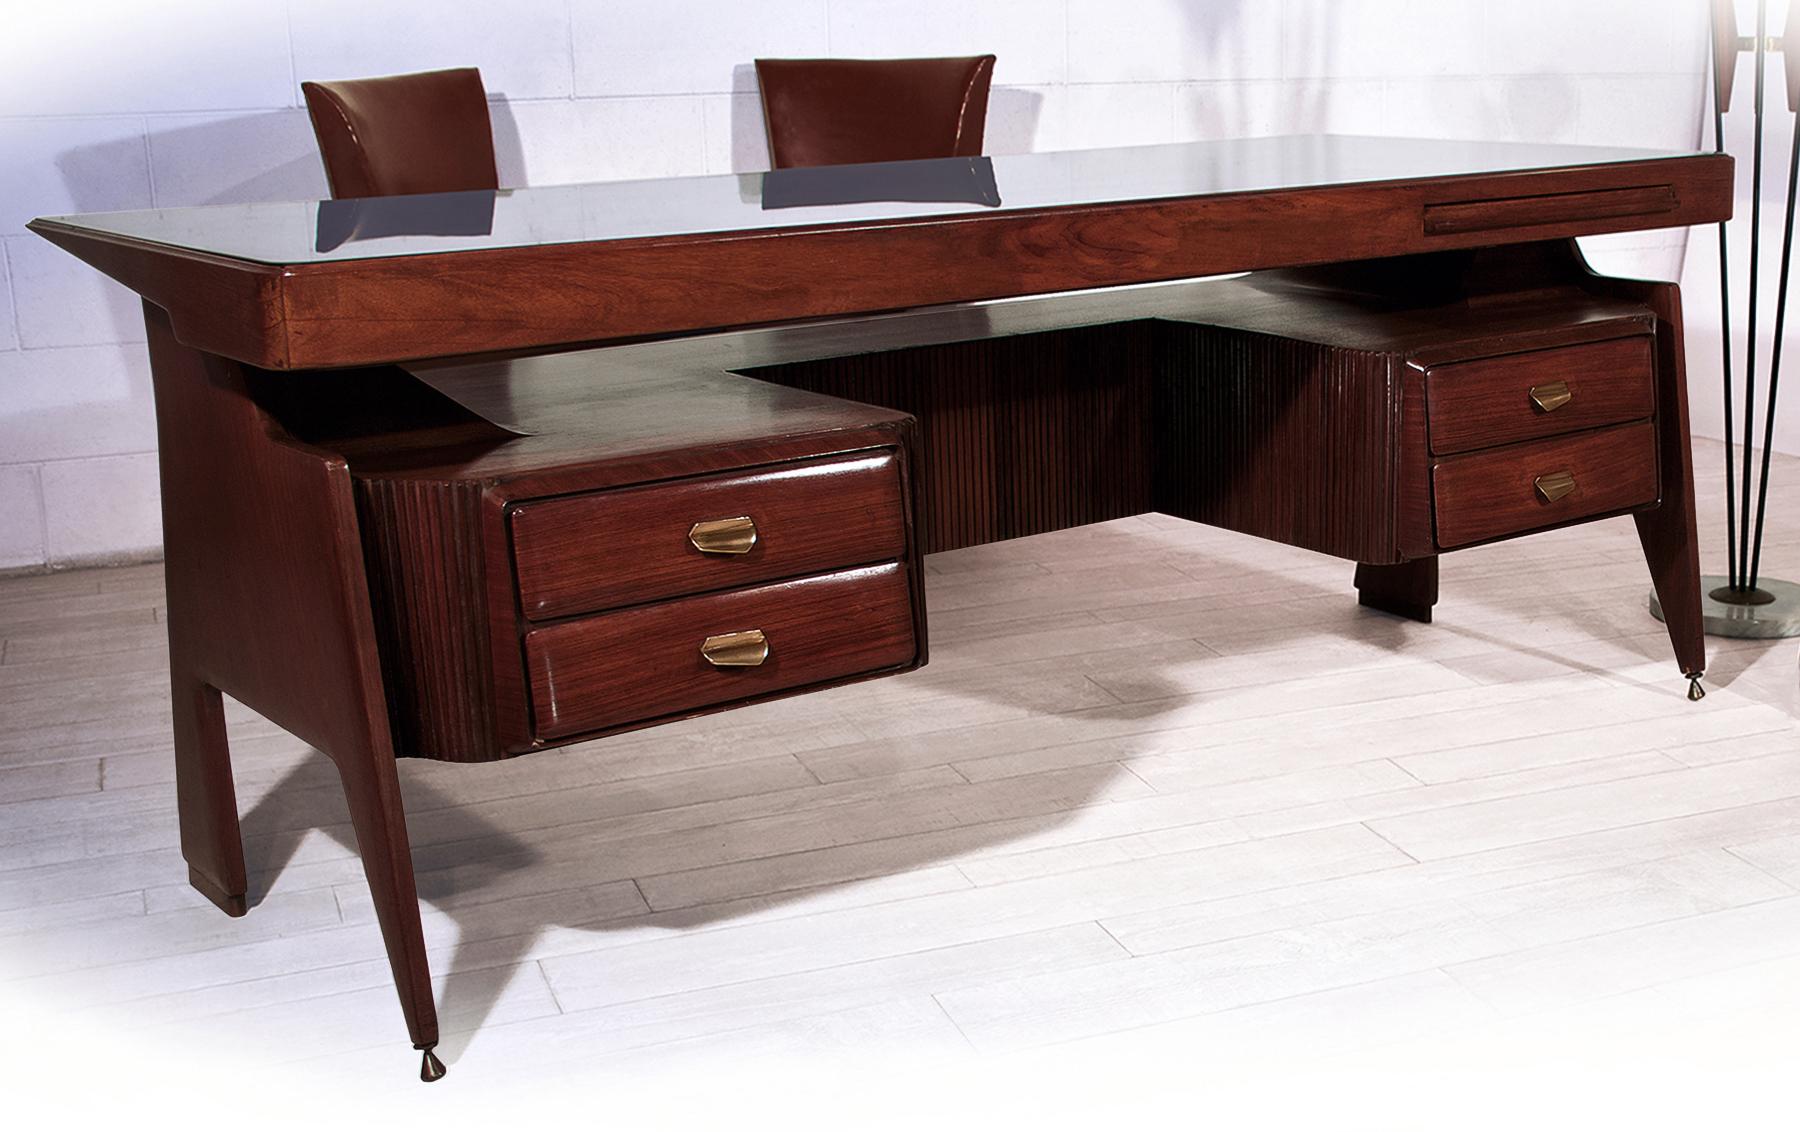 This Executive desk has a stylish and unusual shape that gives it an impressive appearance, all around finished with superb reeded details.
It has been made in Italy over the years 1950s and its design is attributable to Vittorio Dassi.
The